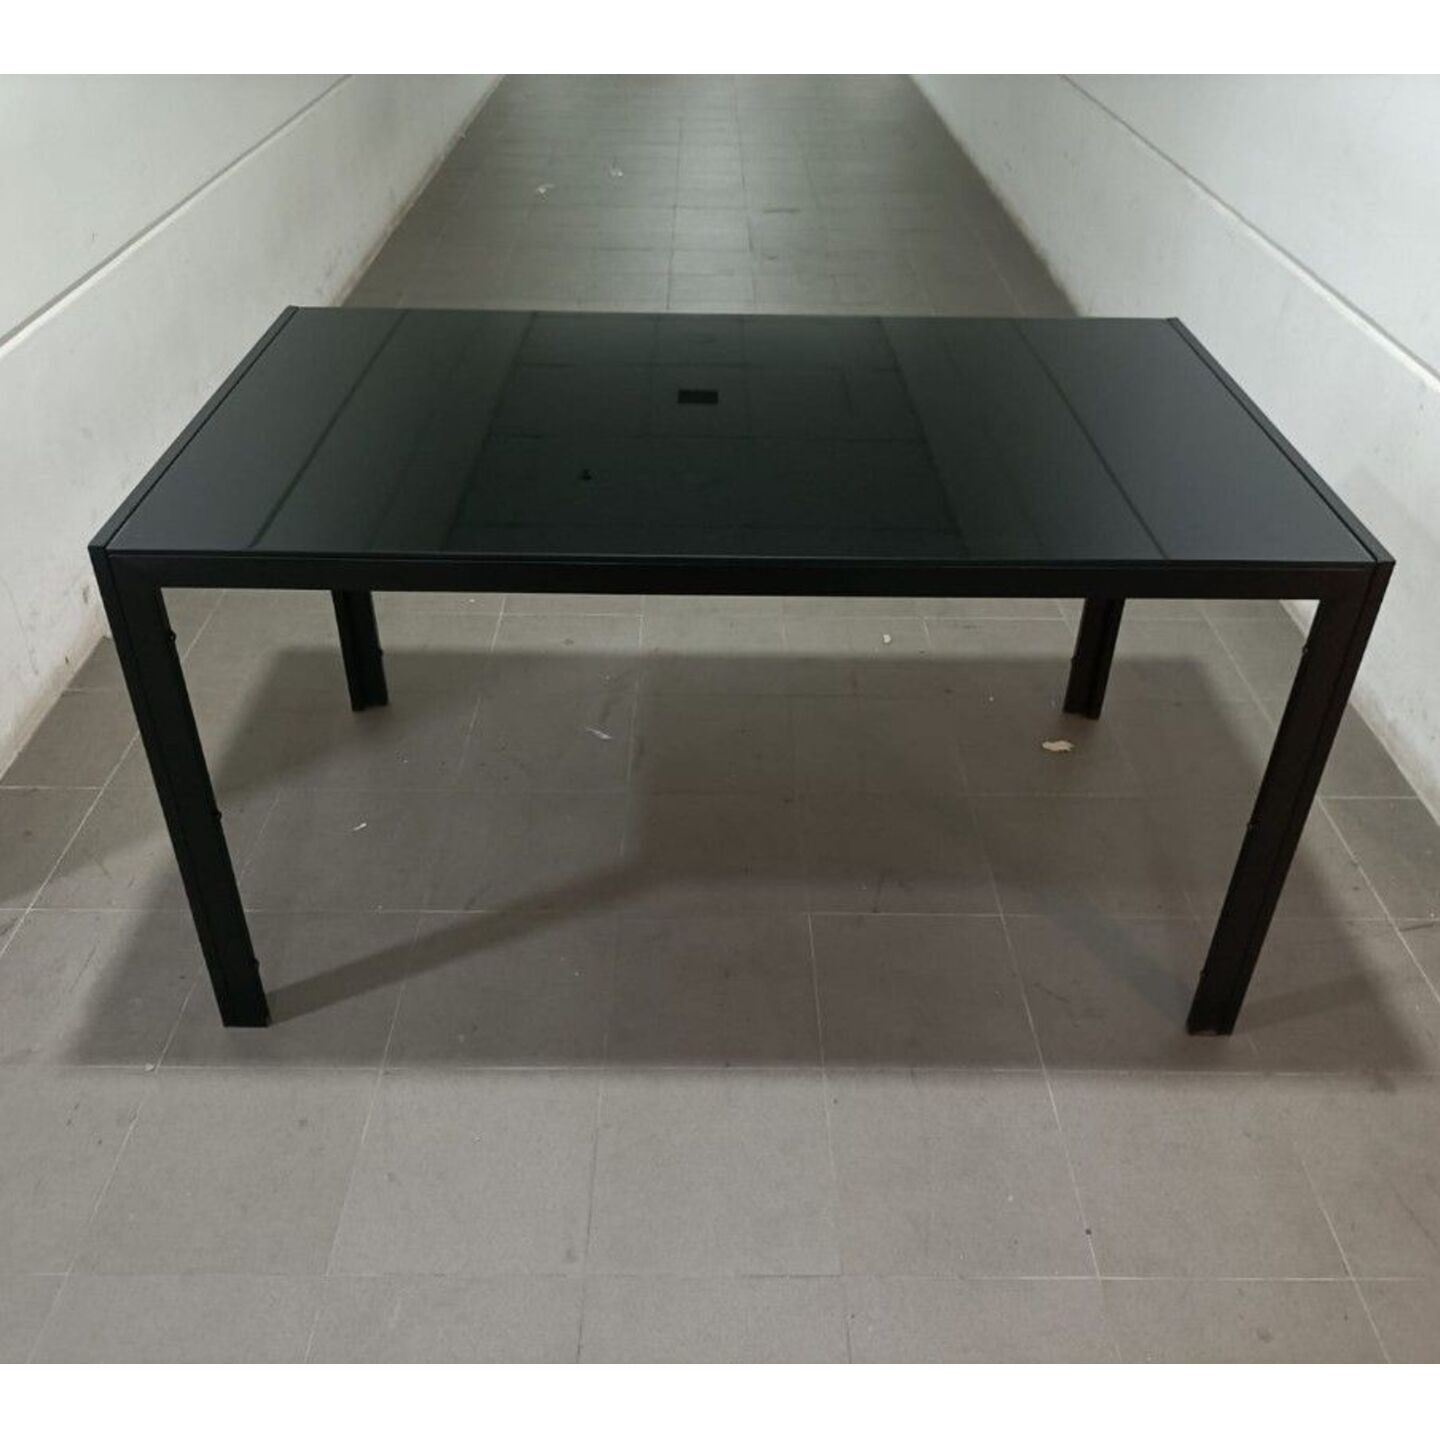 SHONA Black Tempered Glass Dining Table